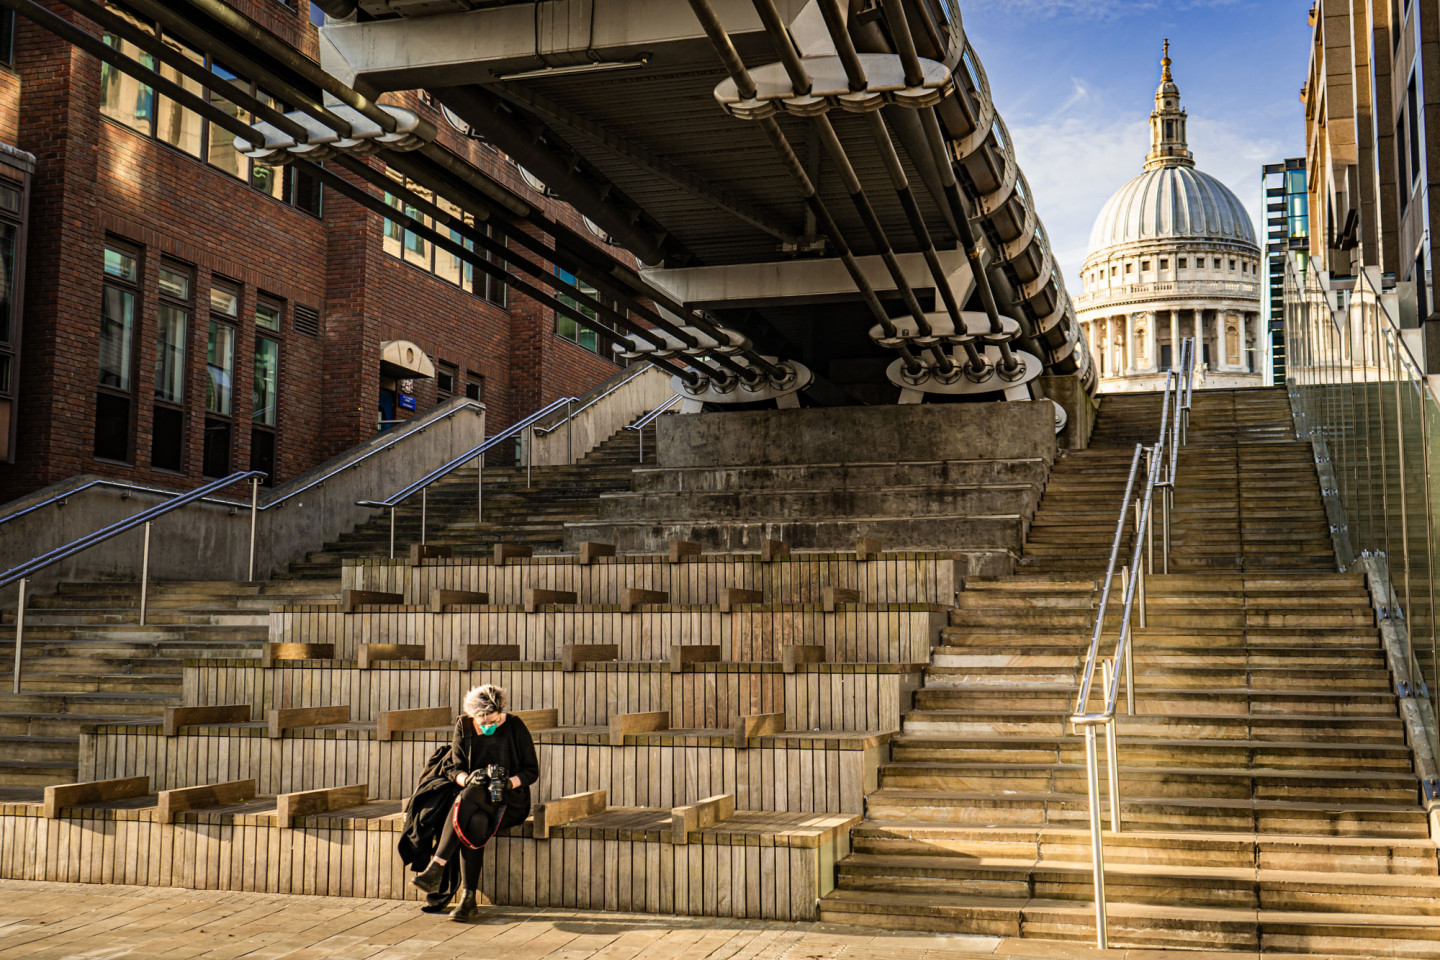 A background of St Pauls early morning on May 4th © Richard Lawrence